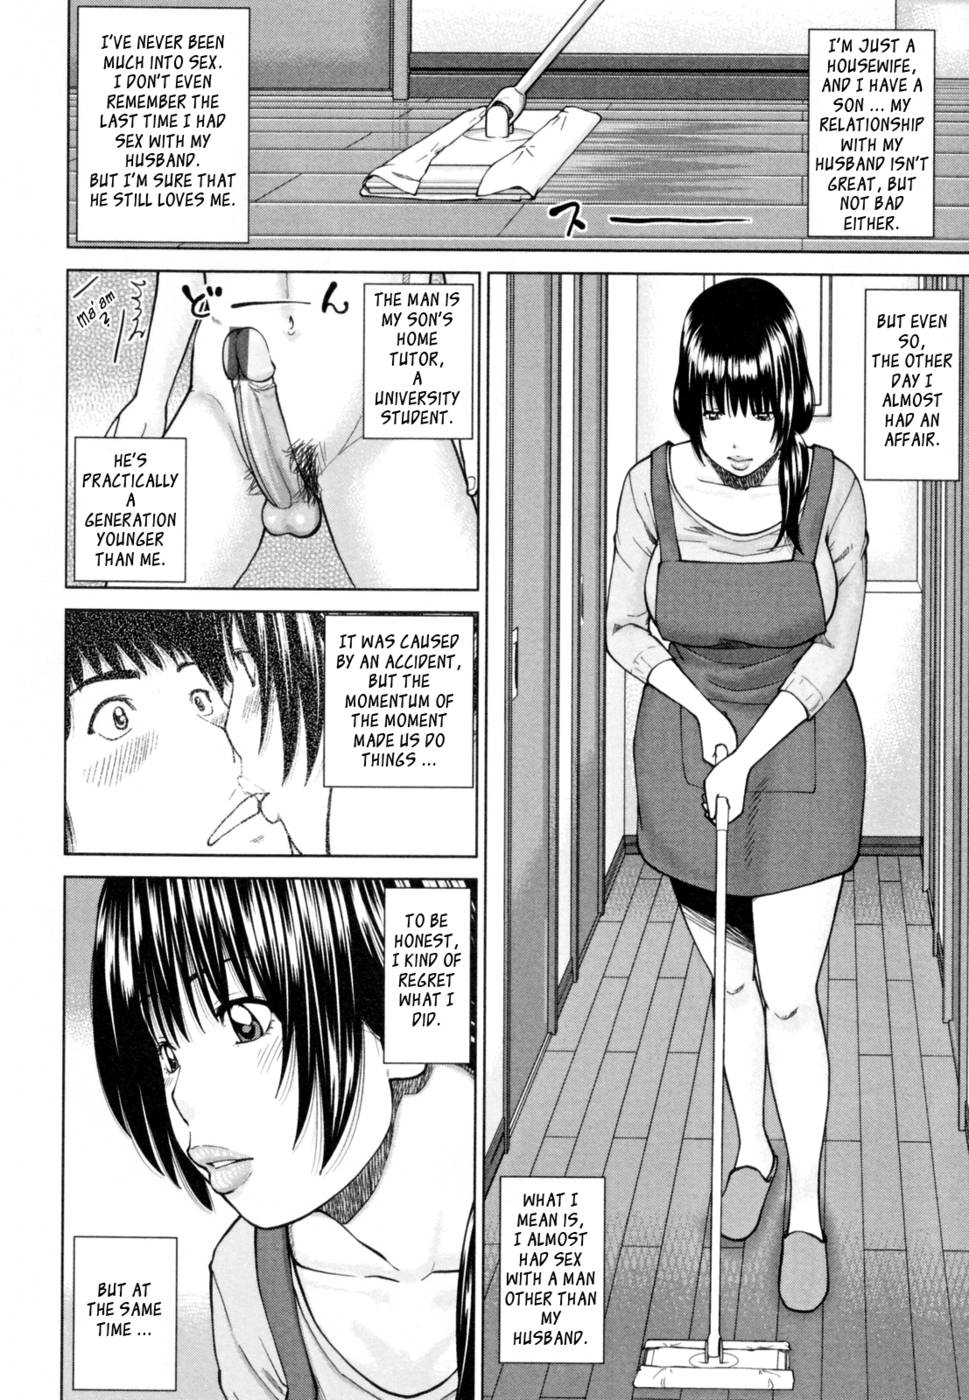 Hentai Manga Comic-32 Year Old Unsatisfied Wife-Chapter 2-Until You Say Yes-2